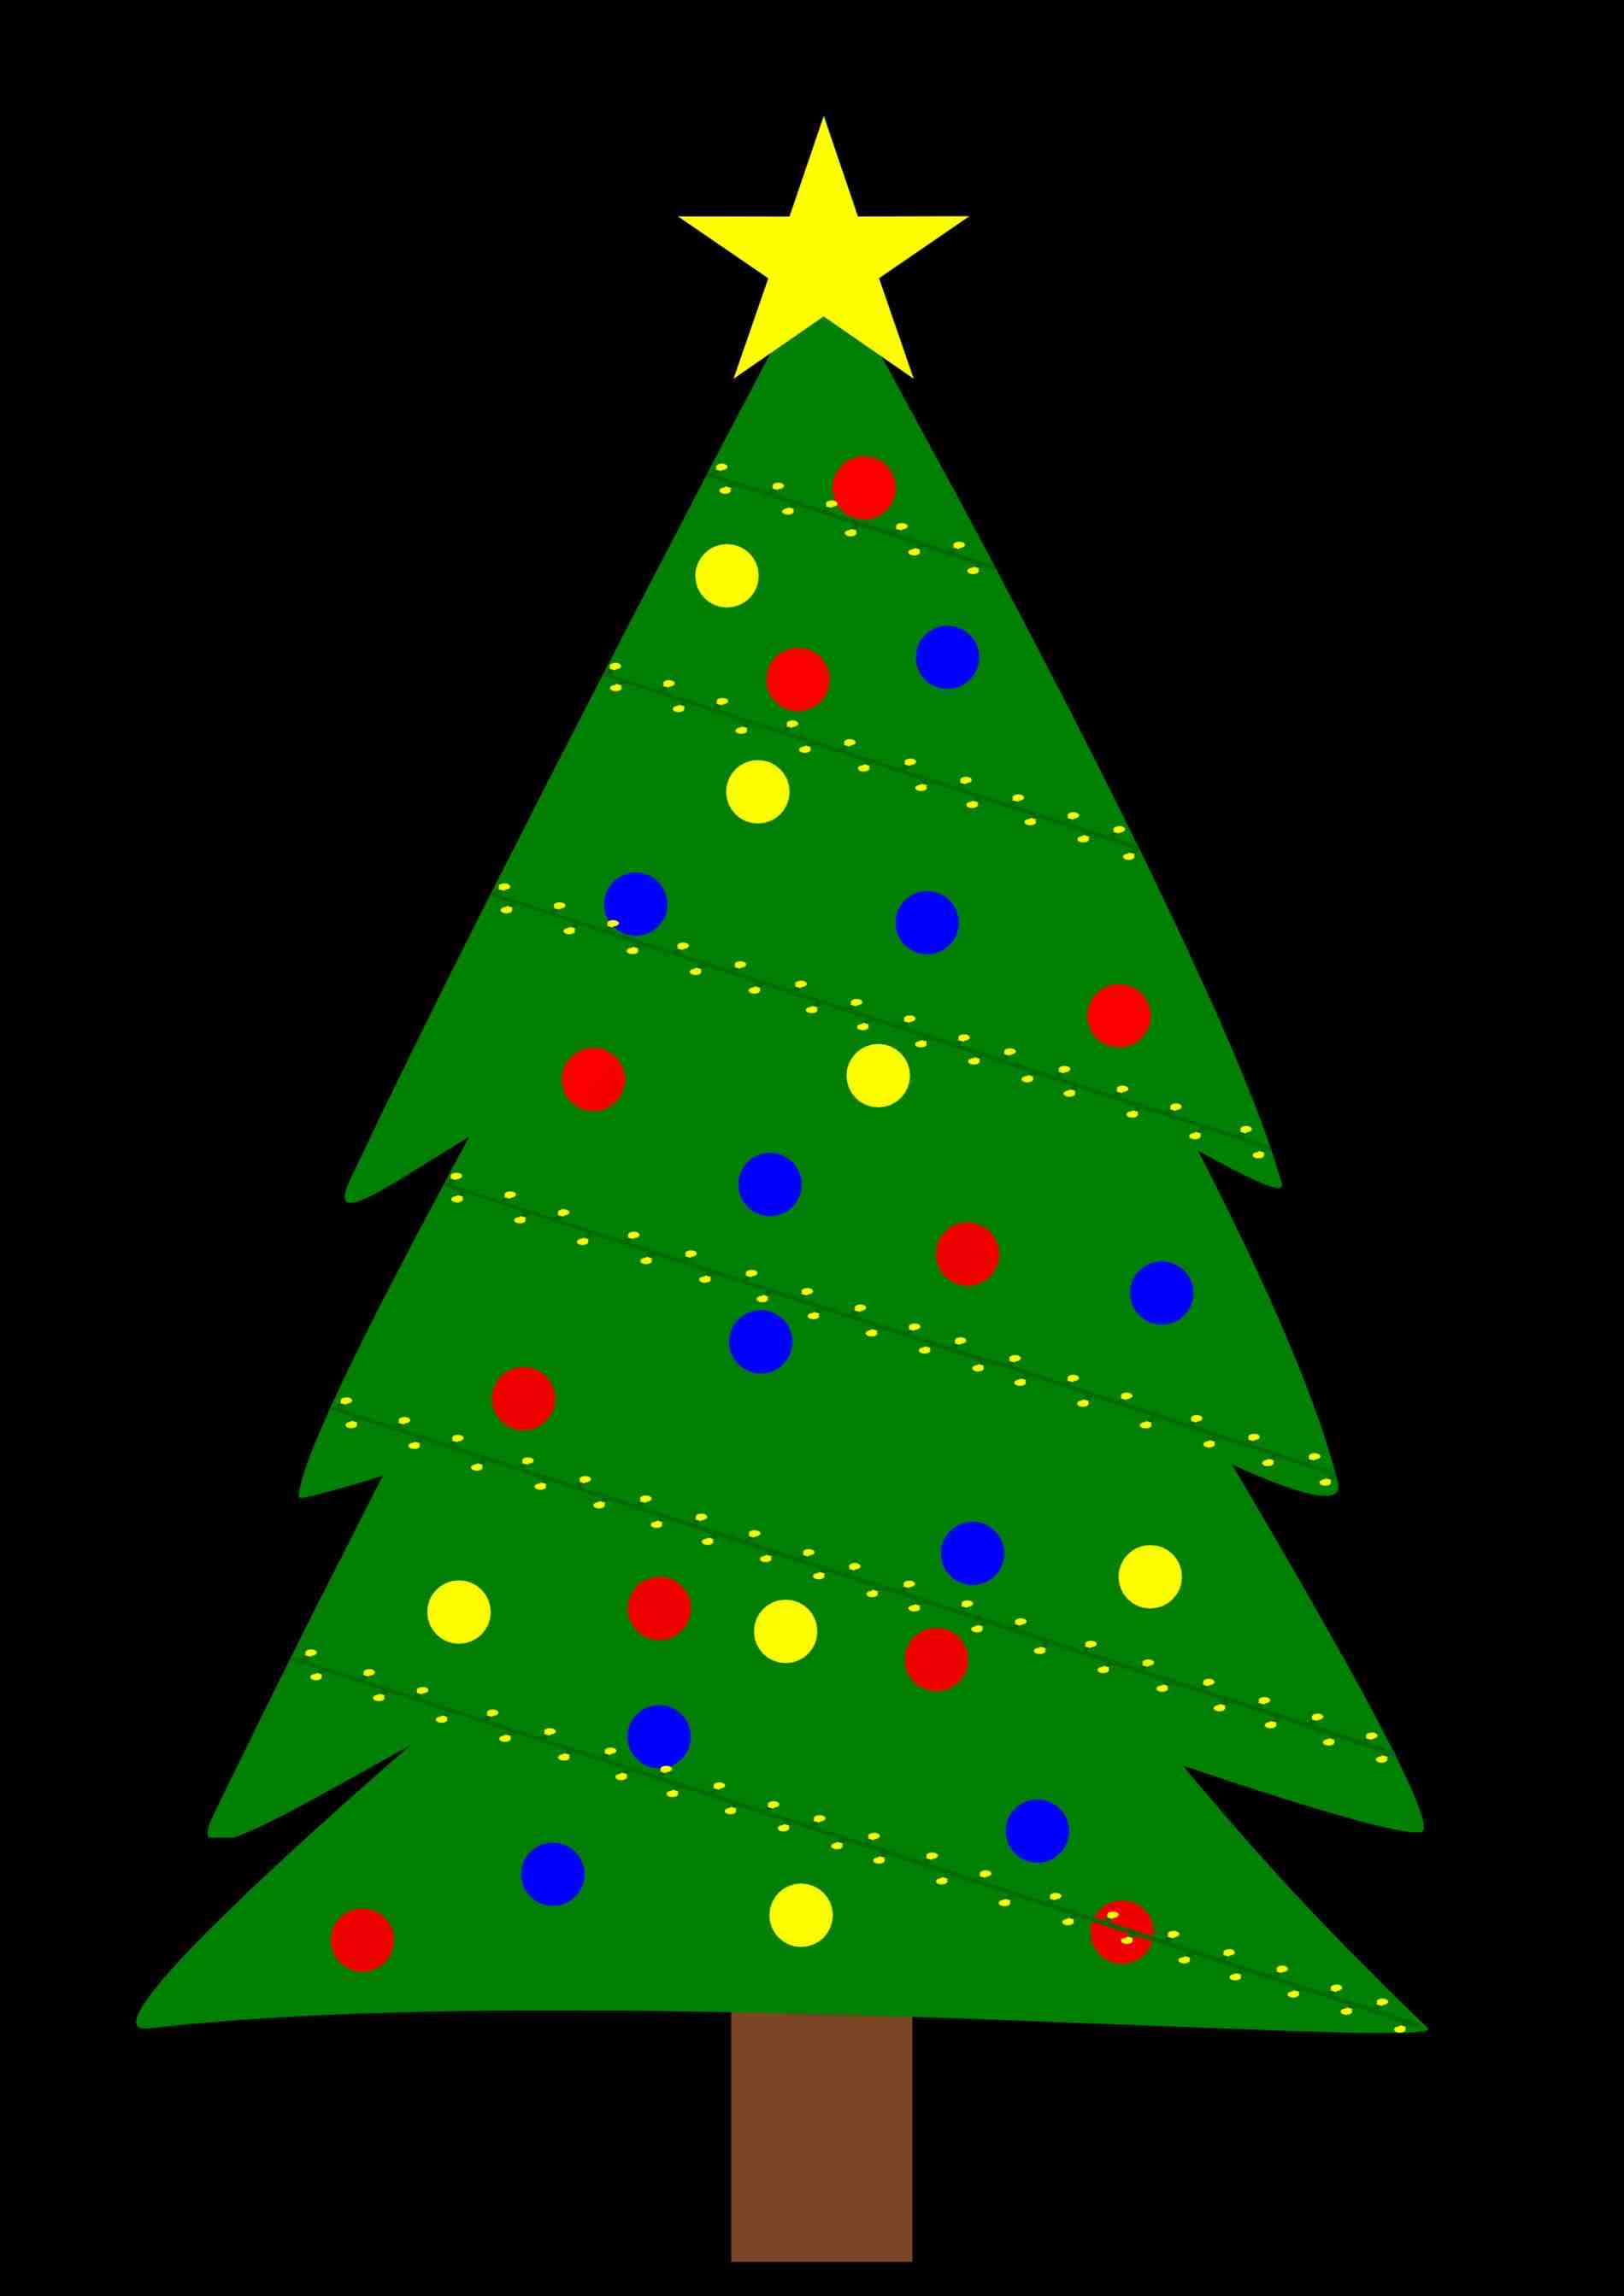 Christmas Tree Outline Clipart | Free download on ClipArtMag